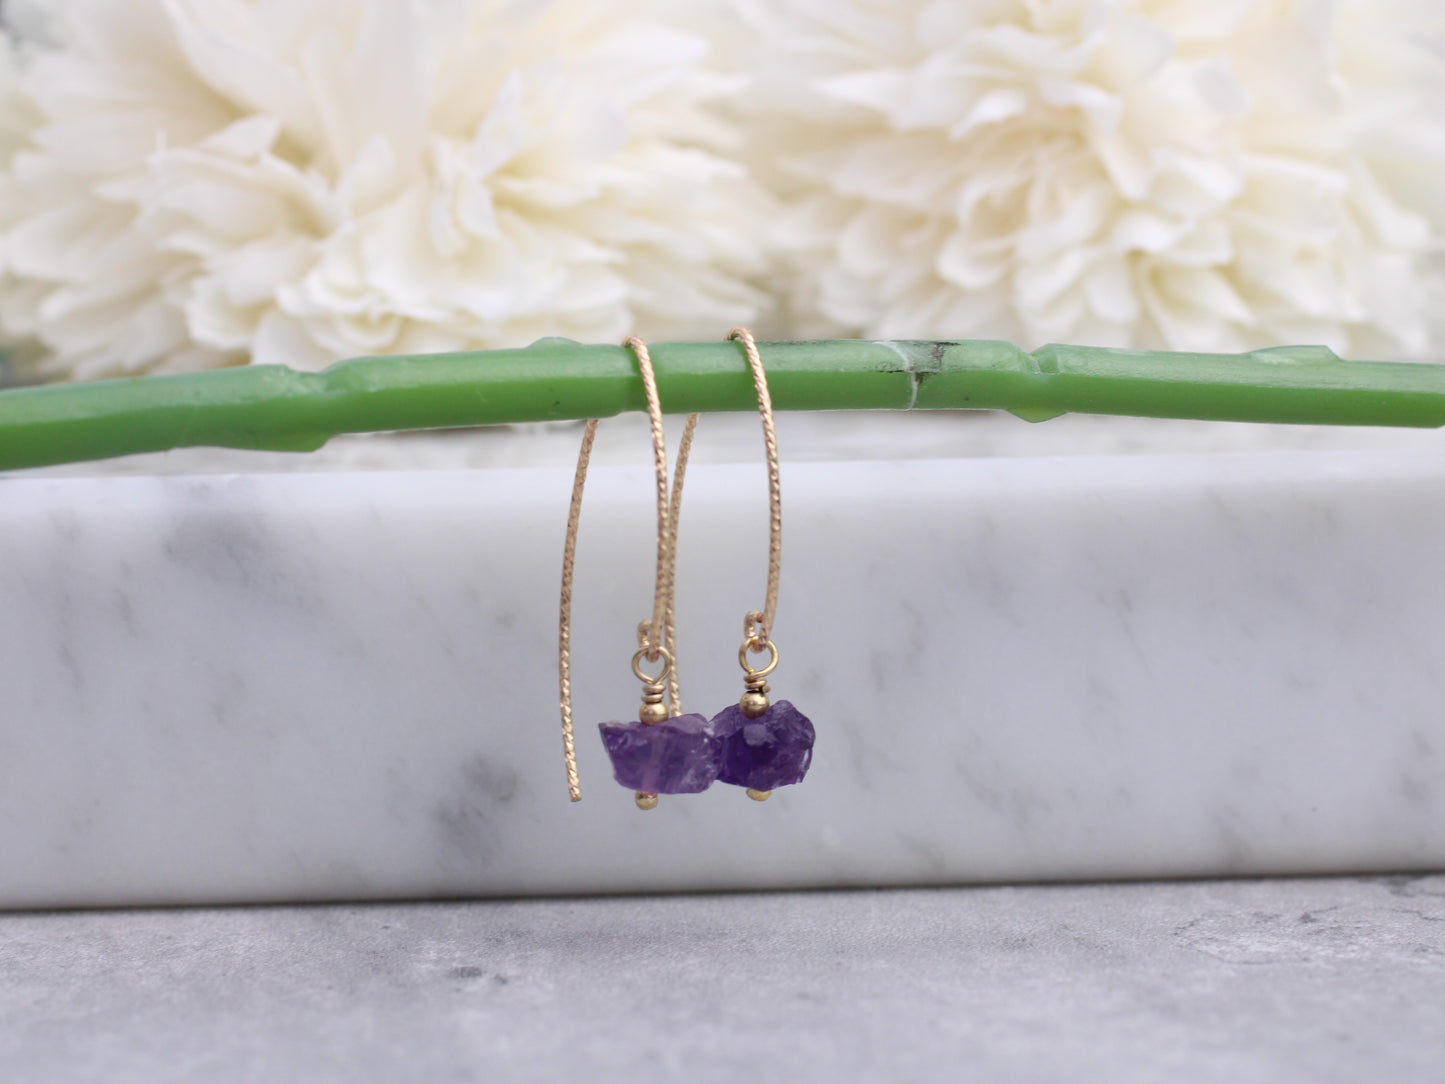 Raw amethyst earrings in sterling silver and gold.